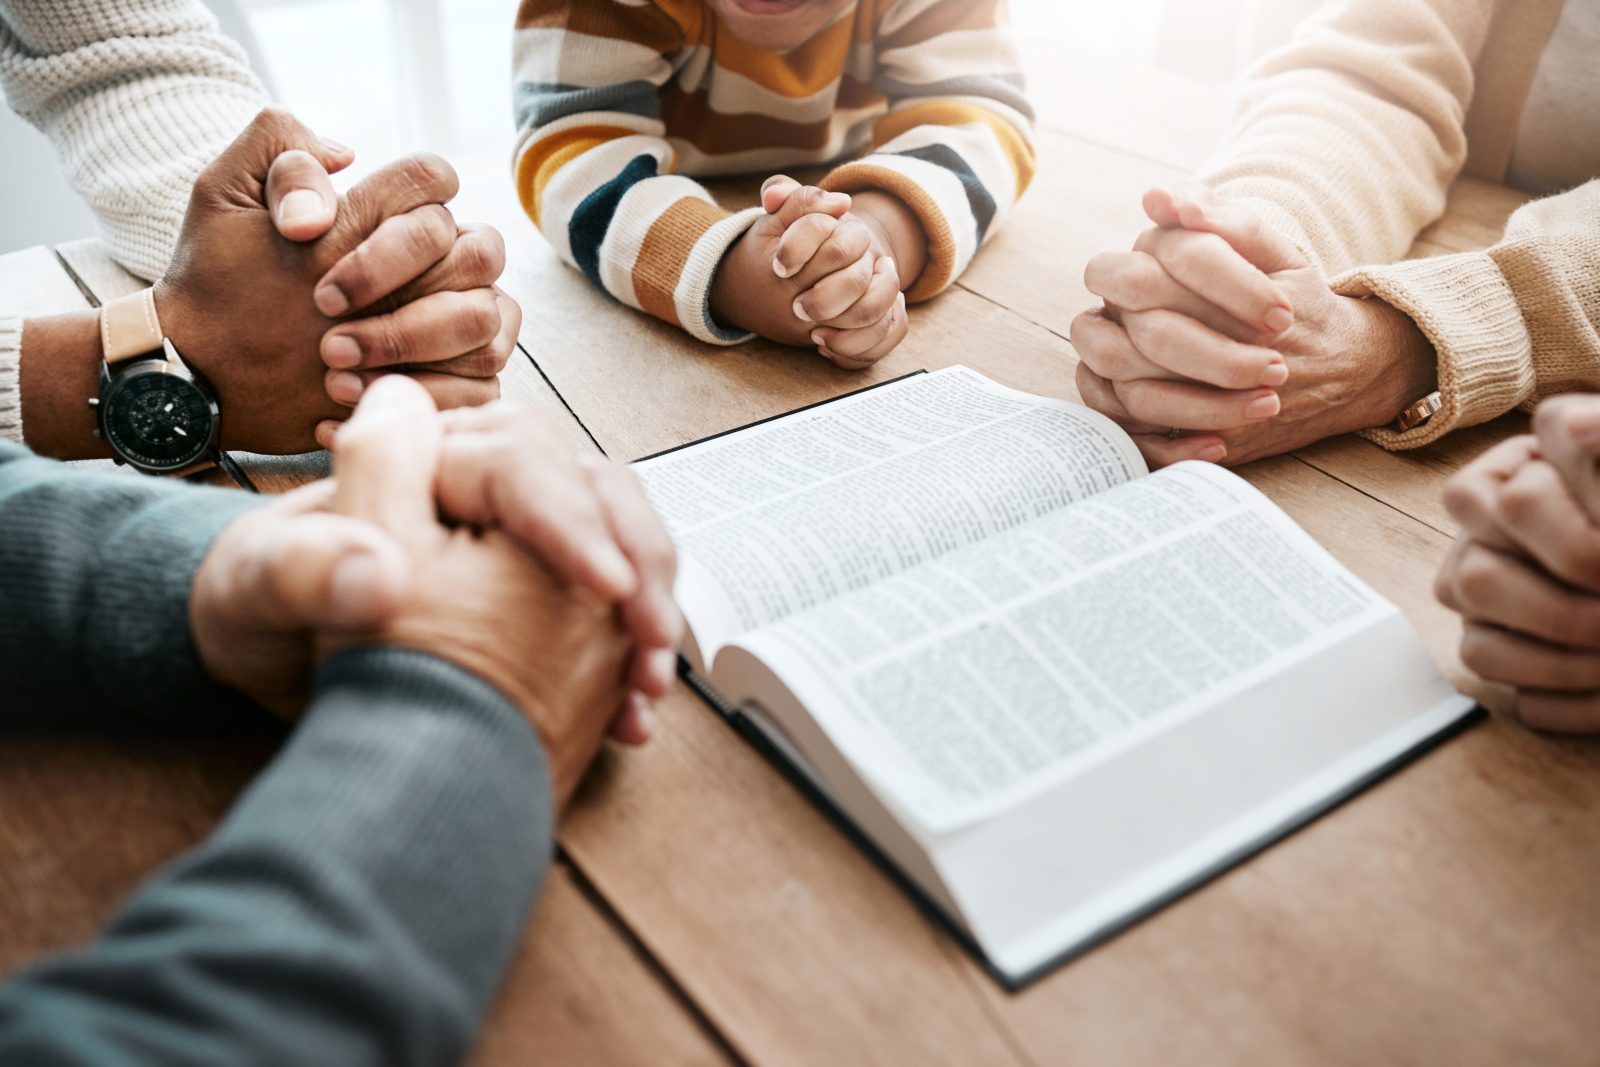 Bible, reading book or hands of big family in prayer, support or hope in Christian home for worship together. Mother, father or grandparents studying, praying or asking God in religion with children.